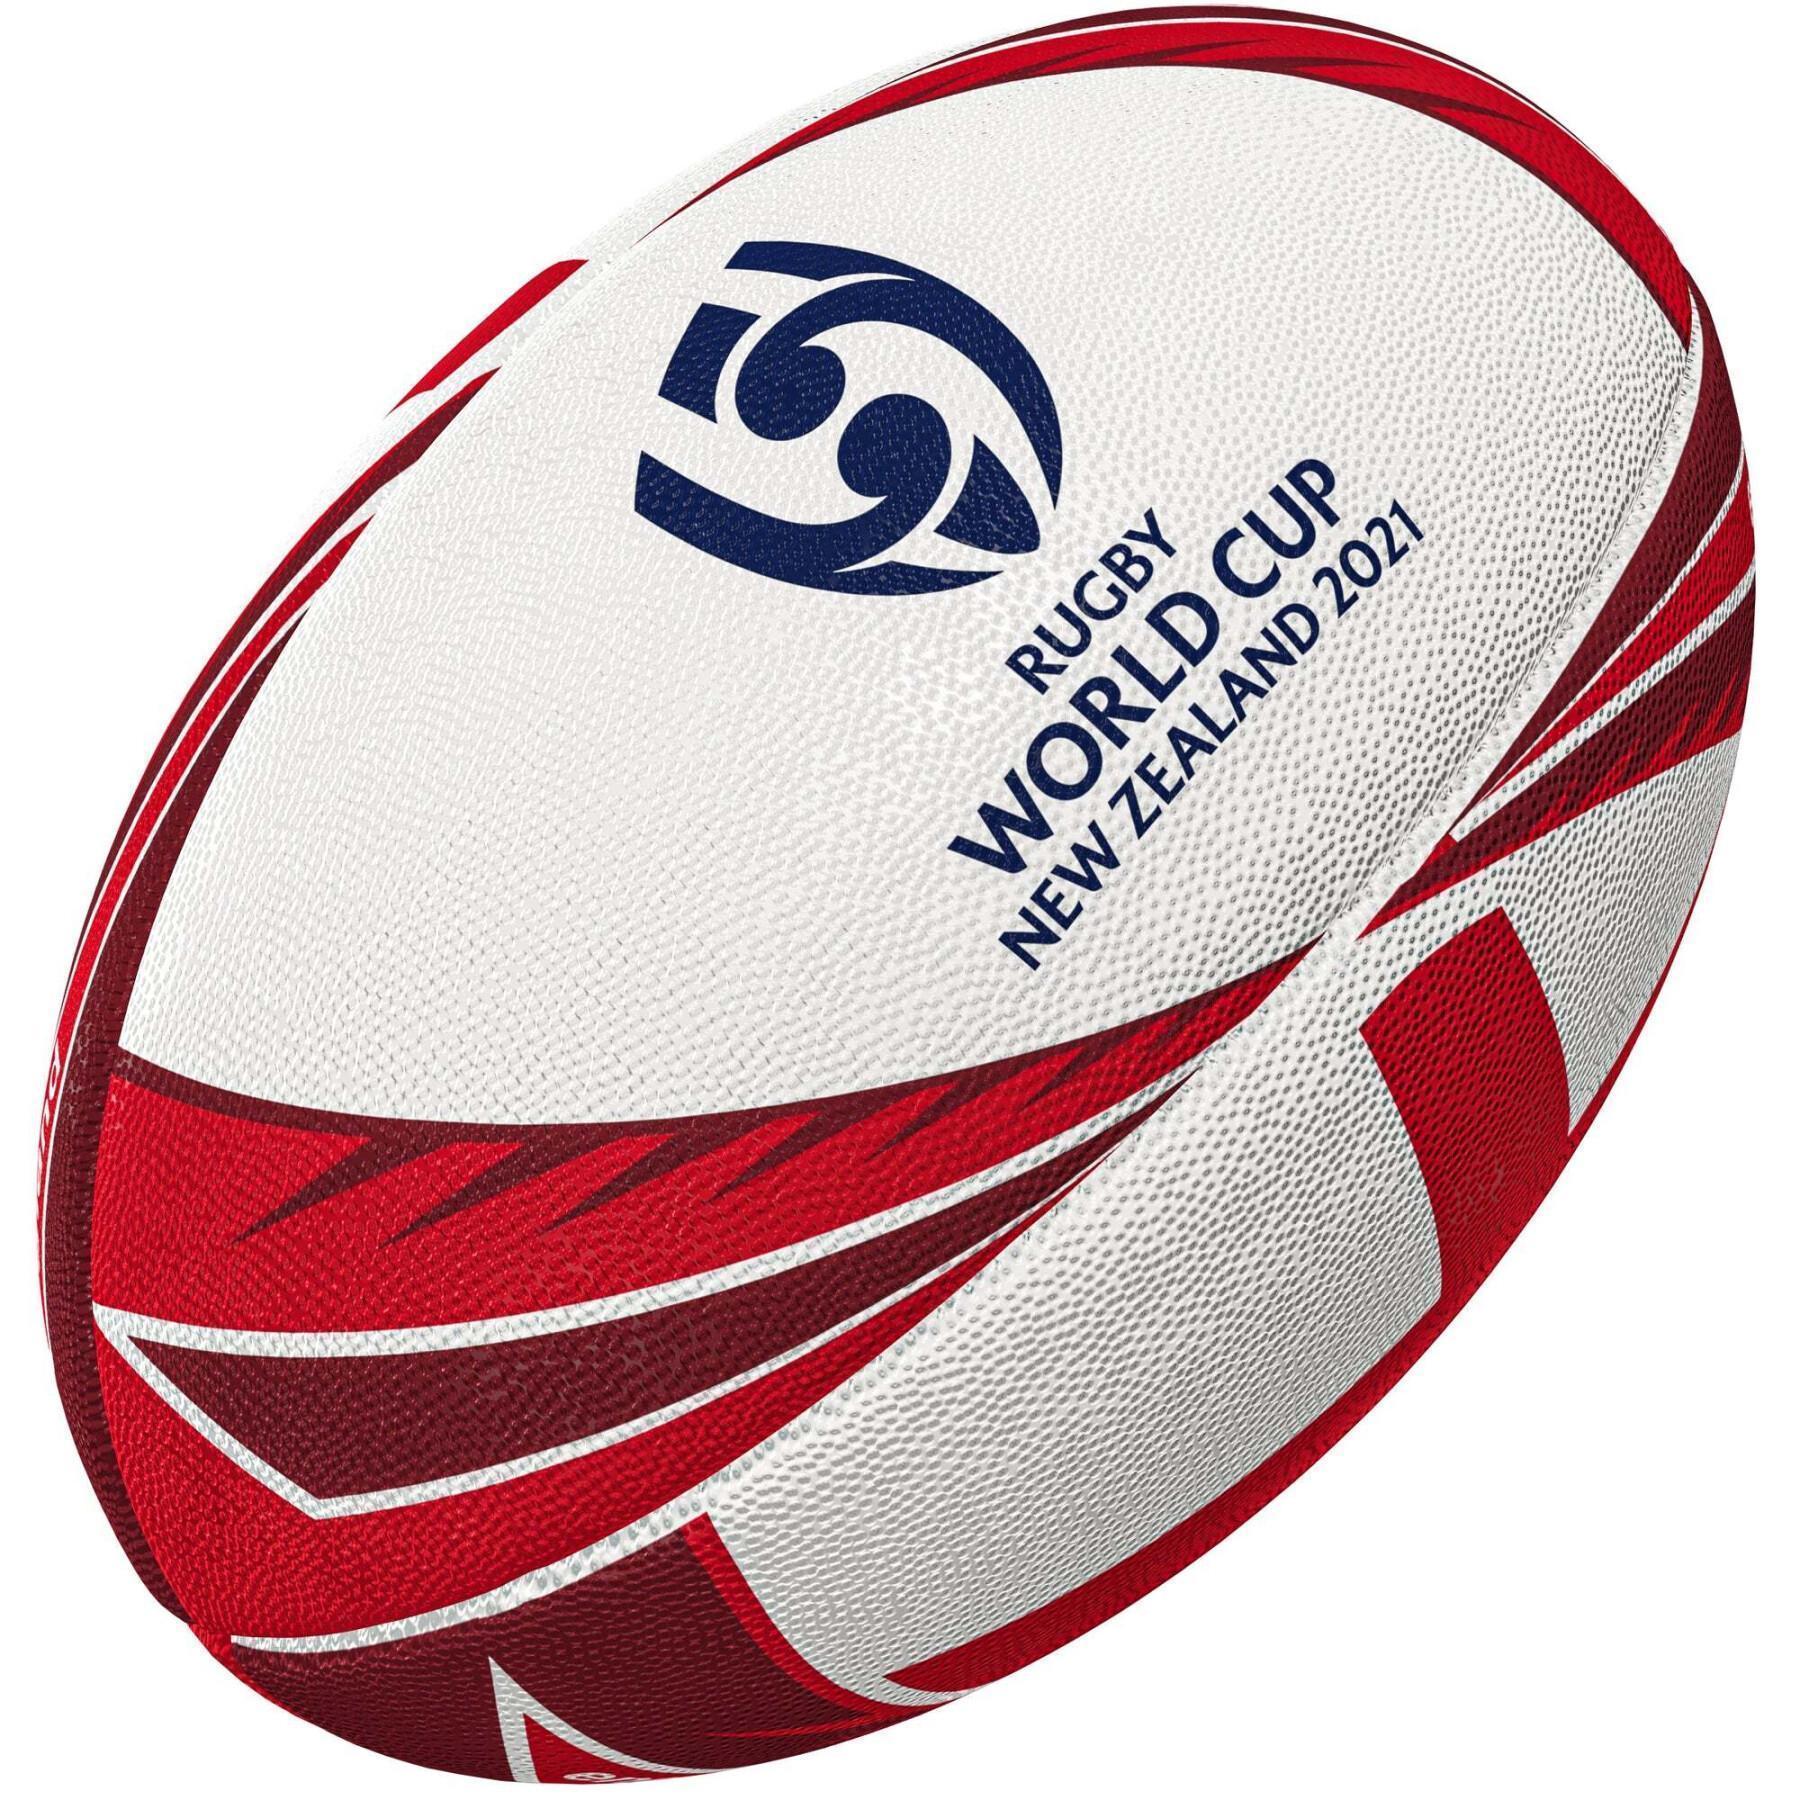 Balón de rugby Angleterre Rugby Wolrd Cup 2021